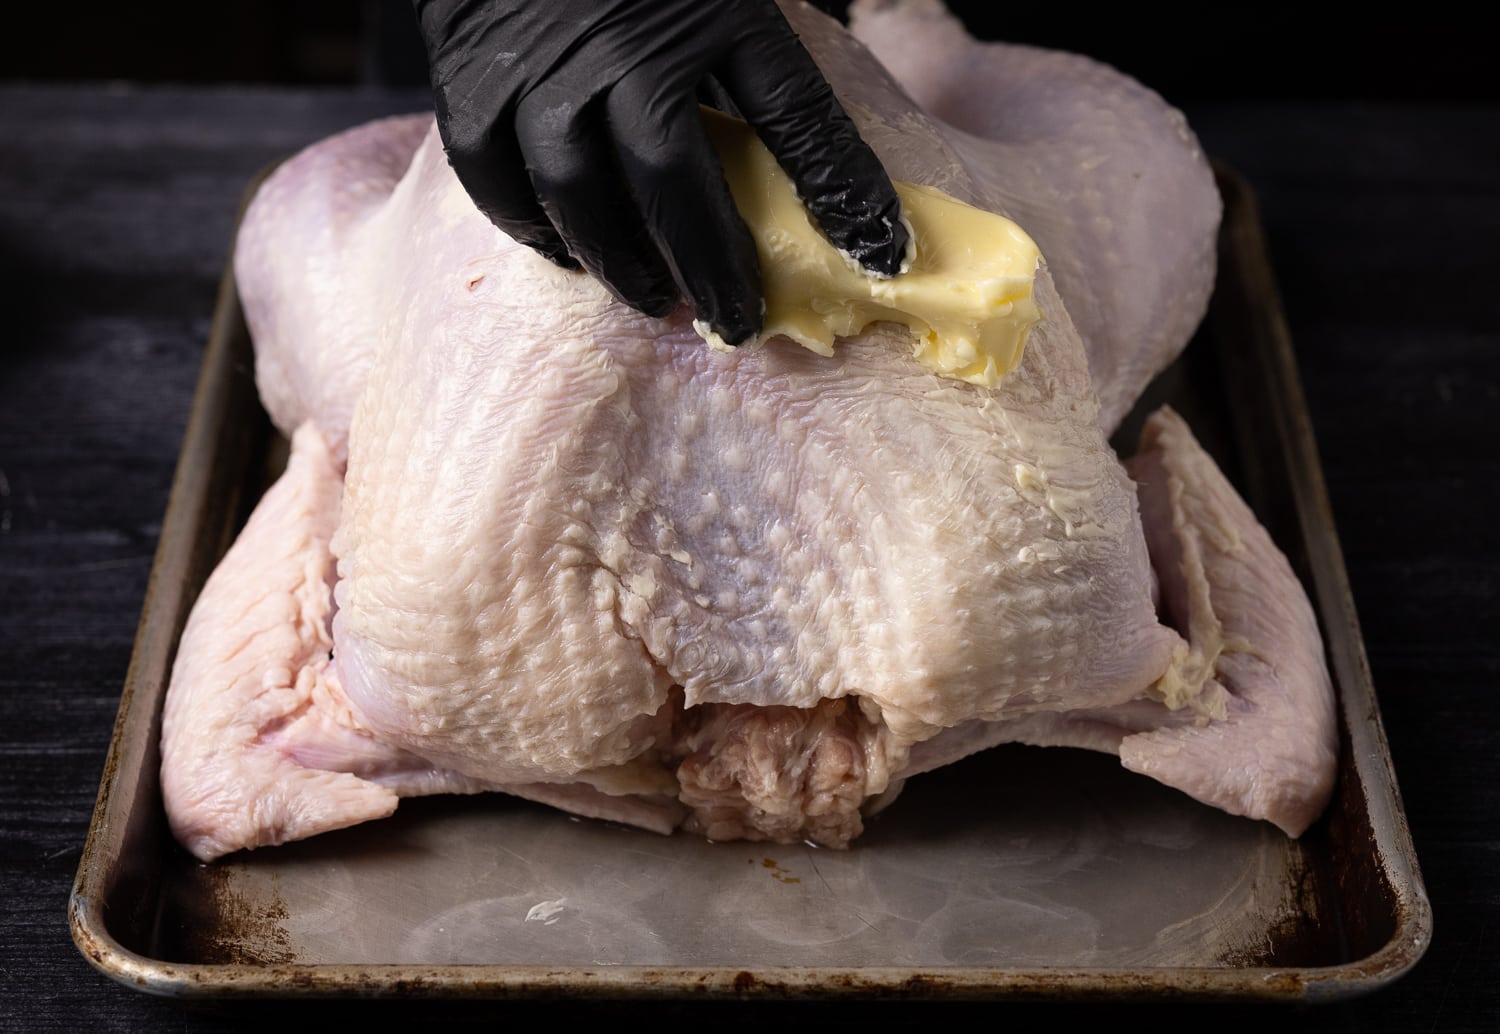 Butter being rubbed on the skin of a whole turkey.